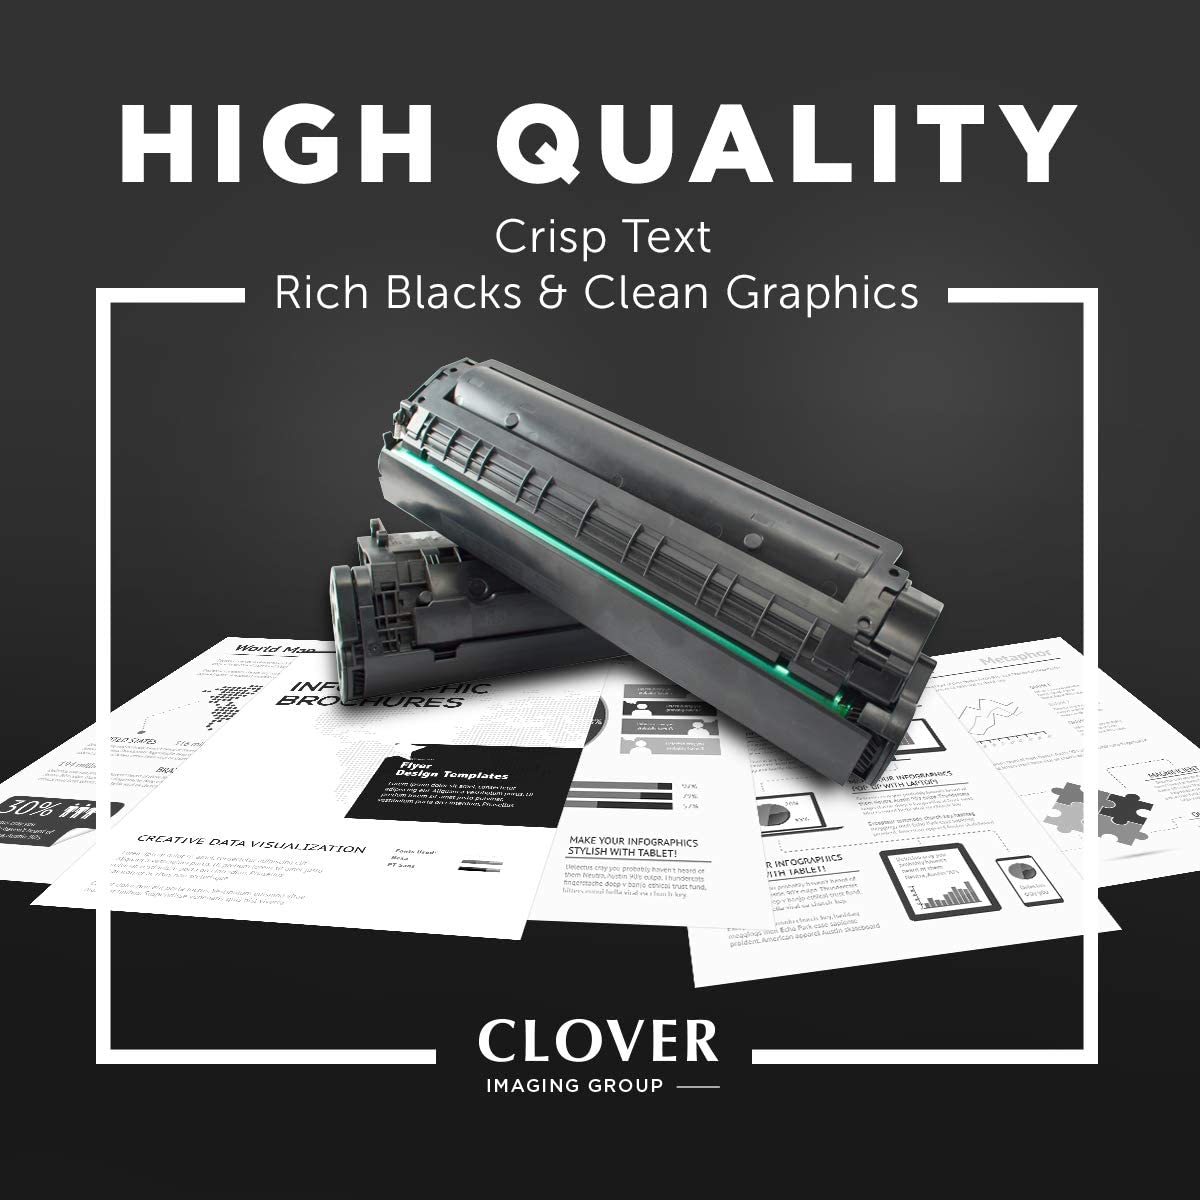 Clover imaging group Clover Remanufactured Toner Cartridge Replacement for Lexmark T650/T652/T654/T656/X652/X654/X656 | Black | High Yield